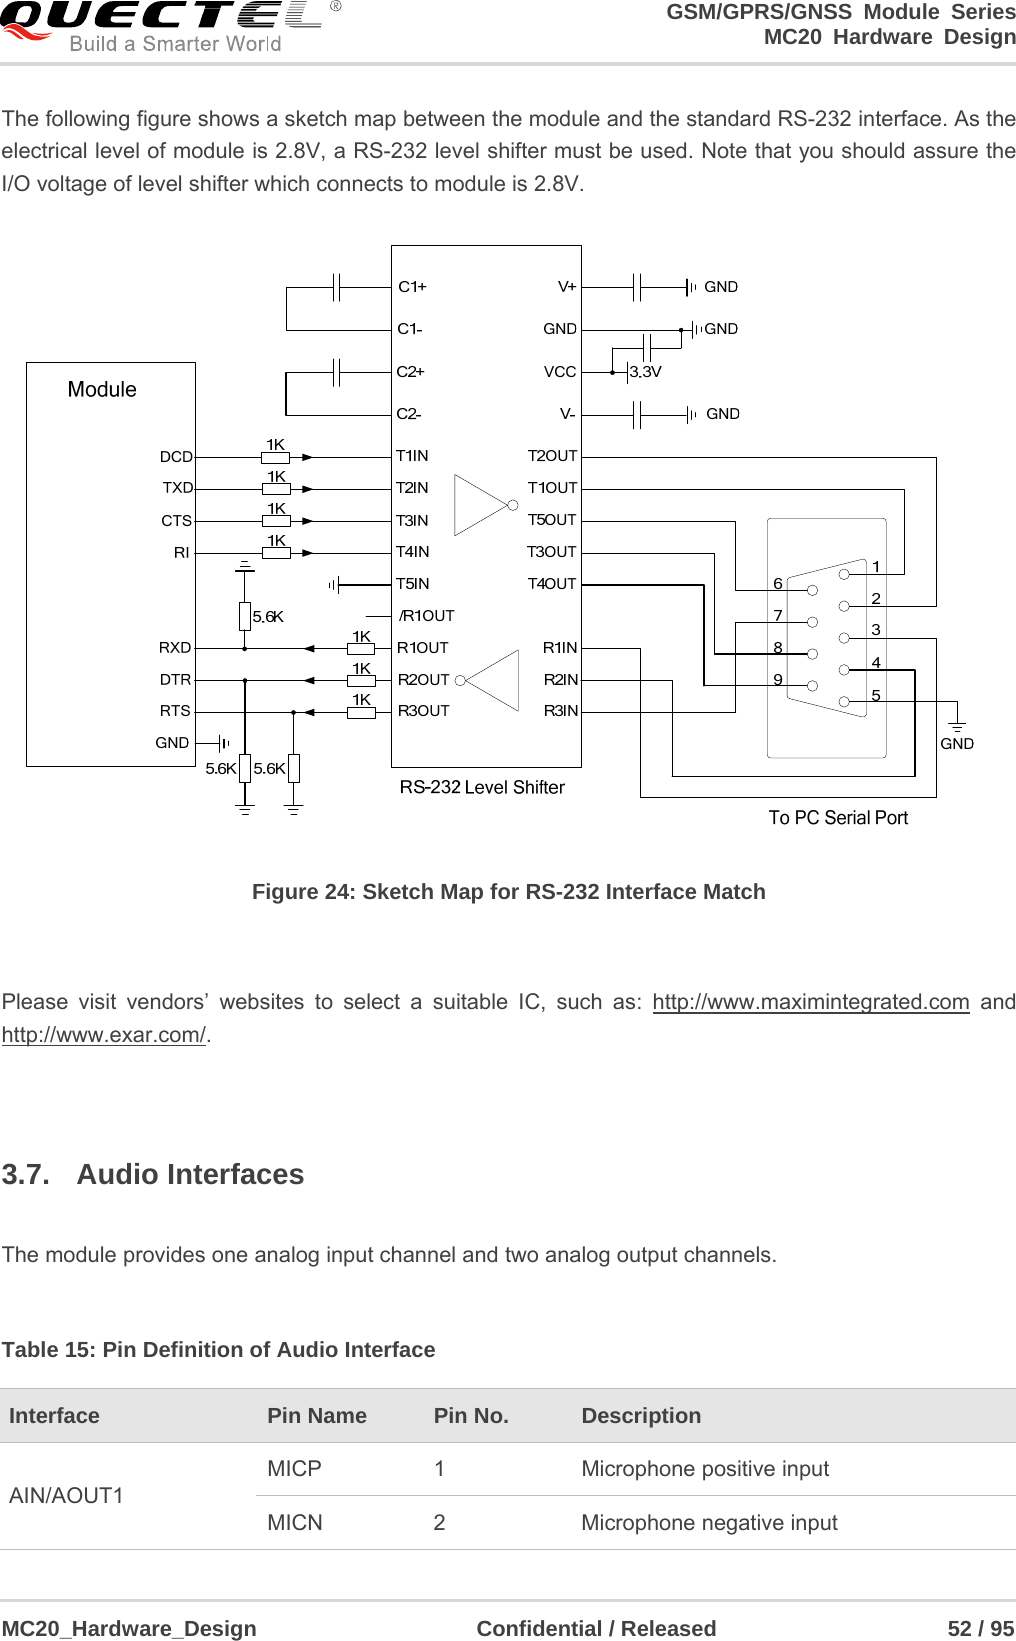                                                                     GSM/GPRS/GNSS Module Series                                                                 MC20 Hardware Design  MC20_Hardware_Design                    Confidential / Released                     52 / 95     The following figure shows a sketch map between the module and the standard RS-232 interface. As the electrical level of module is 2.8V, a RS-232 level shifter must be used. Note that you should assure the I/O voltage of level shifter which connects to module is 2.8V.  Figure 24: Sketch Map for RS-232 Interface Match  Please visit vendors’ websites to select a suitable IC, such as: http://www.maximintegrated.com and http://www.exar.com/.   3.7. Audio Interfaces  The module provides one analog input channel and two analog output channels.  Table 15: Pin Definition of Audio Interface Interface  Pin Name  Pin No.  Description AIN/AOUT1 MICP 1  Microphone positive input MICN 2  Microphone negative input 